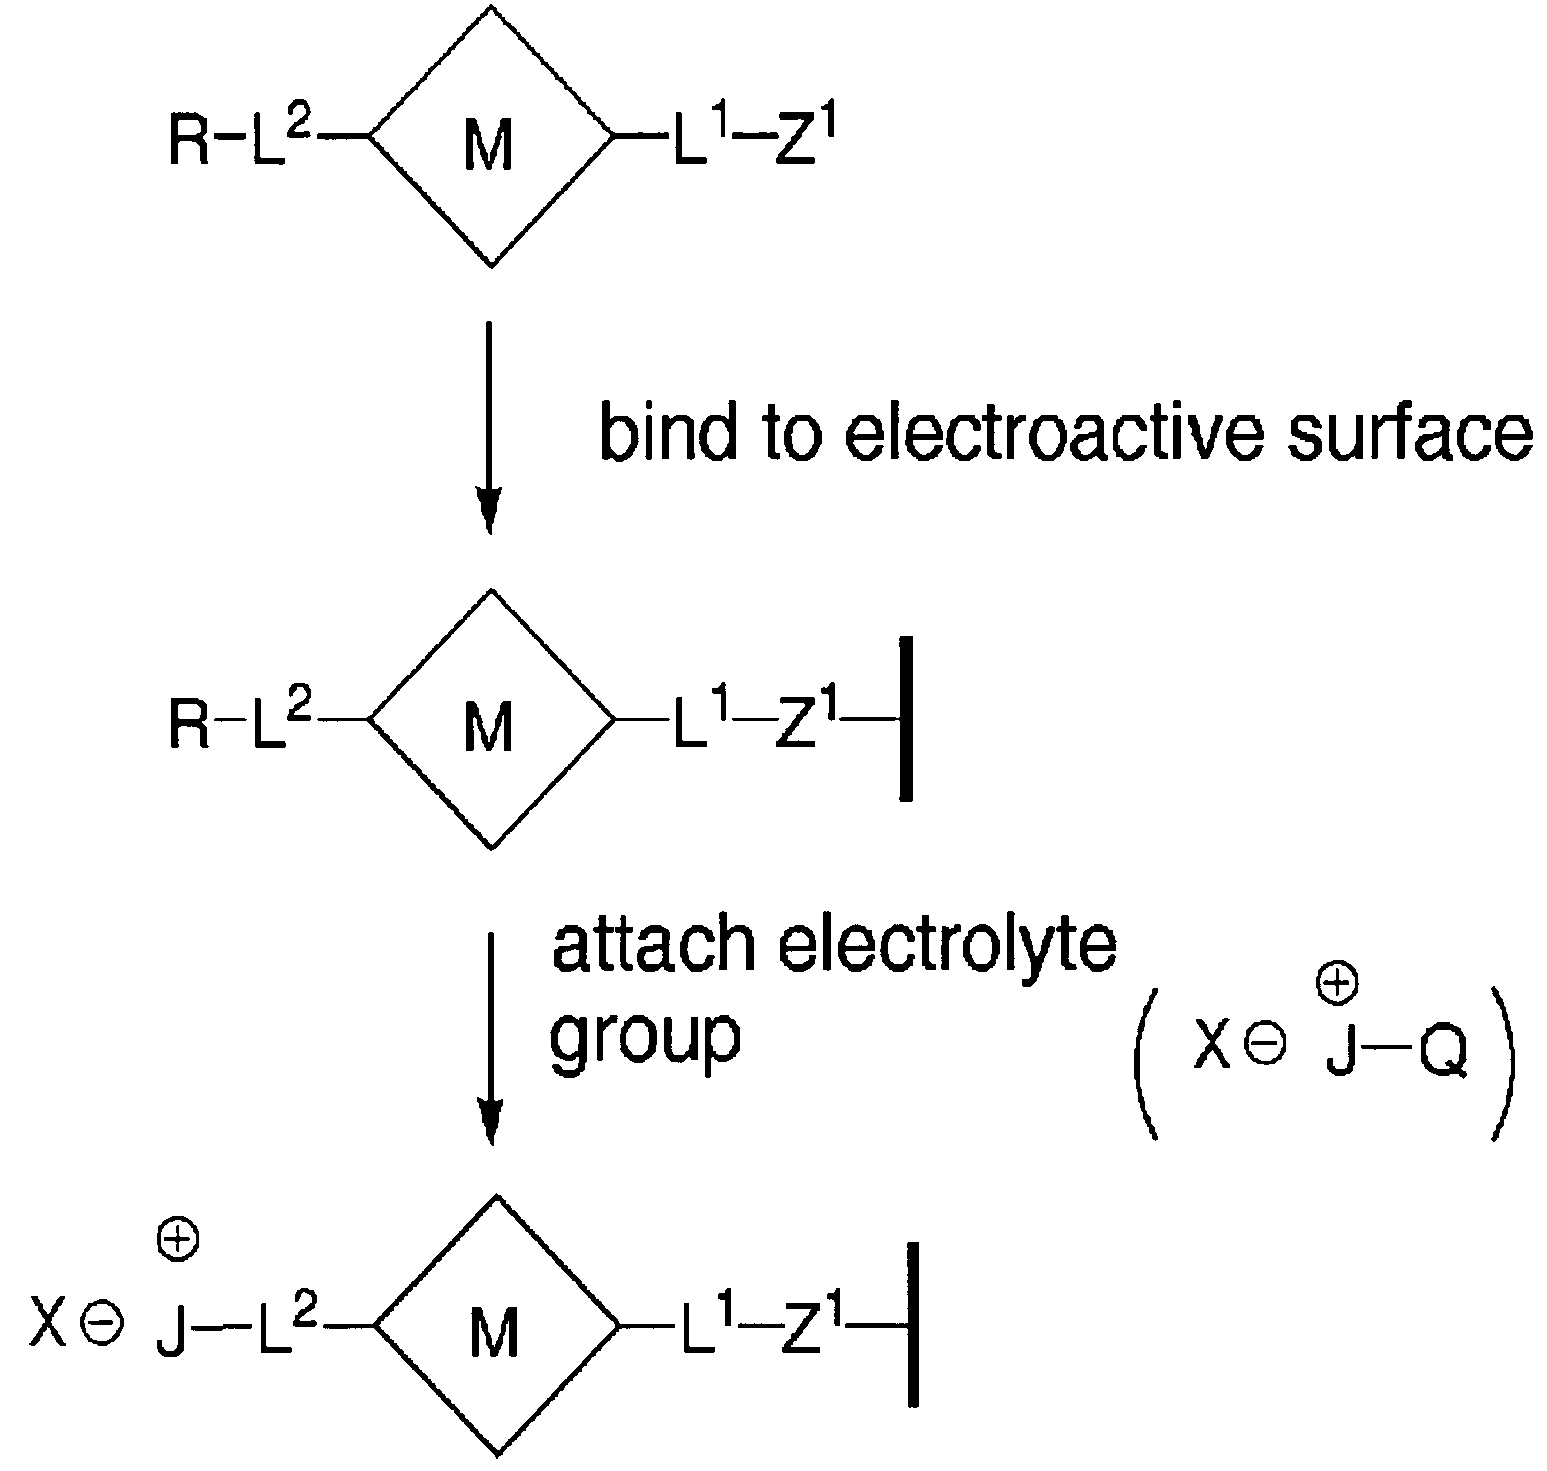 In situ patterning of electrolyte for molecular information storage devices